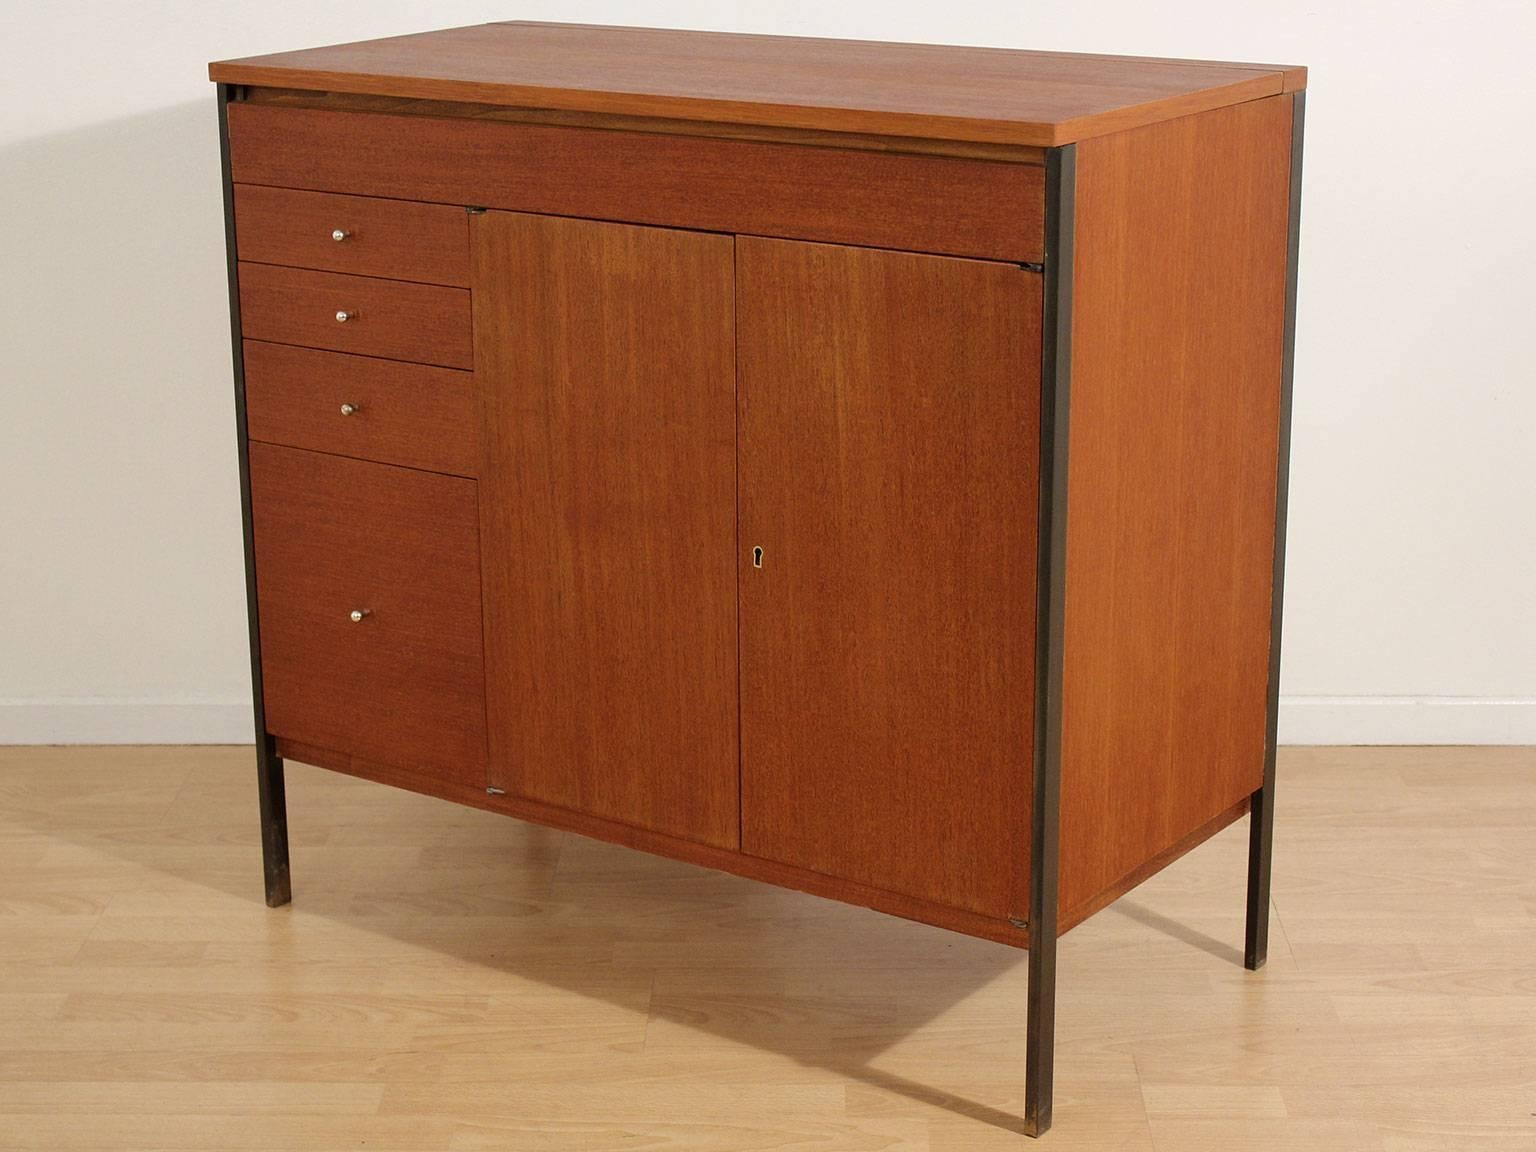 Seldom seen Paul McCobb designed bar/credenza for Calvin Furniture, circa 1950s. Legs are made of brass and have a wonderful patina. Mahogany wood has been refinished and hand oiled to bring out the beauty of the wood. Has the original key to lock